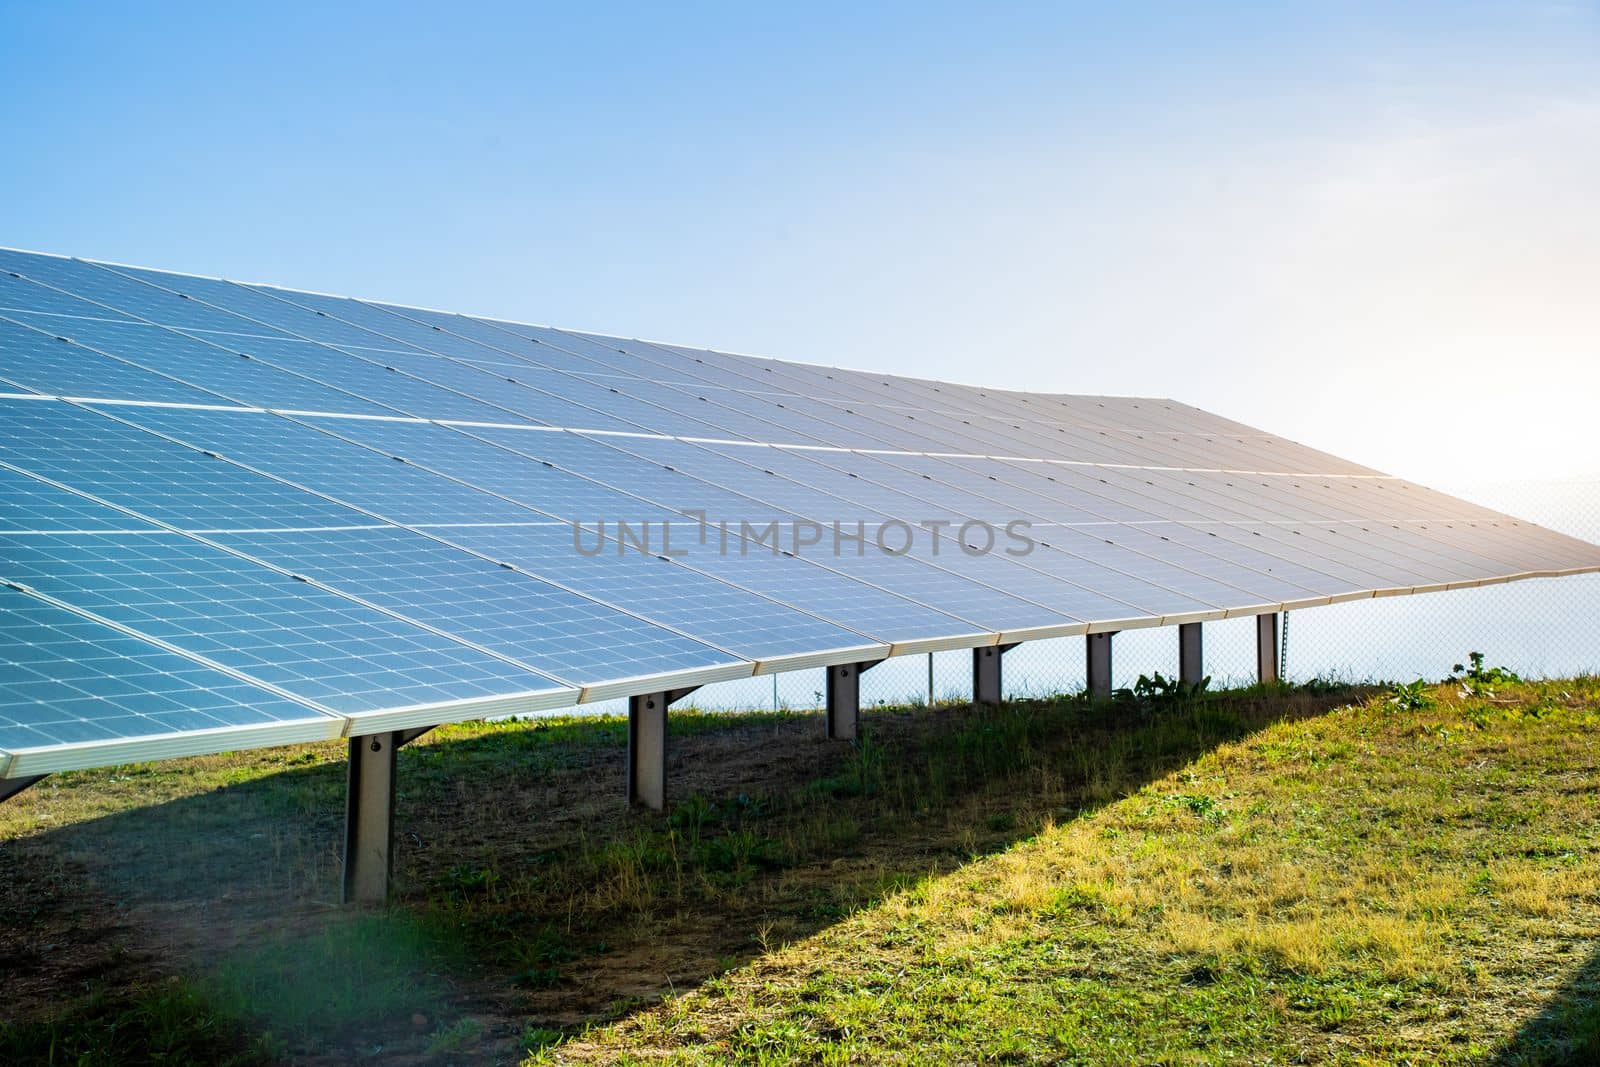 Solar panels system in a green field with blue sky and the sun. Renewable and sustainable alternative energy production power generators from sun. Eco technology for better future.